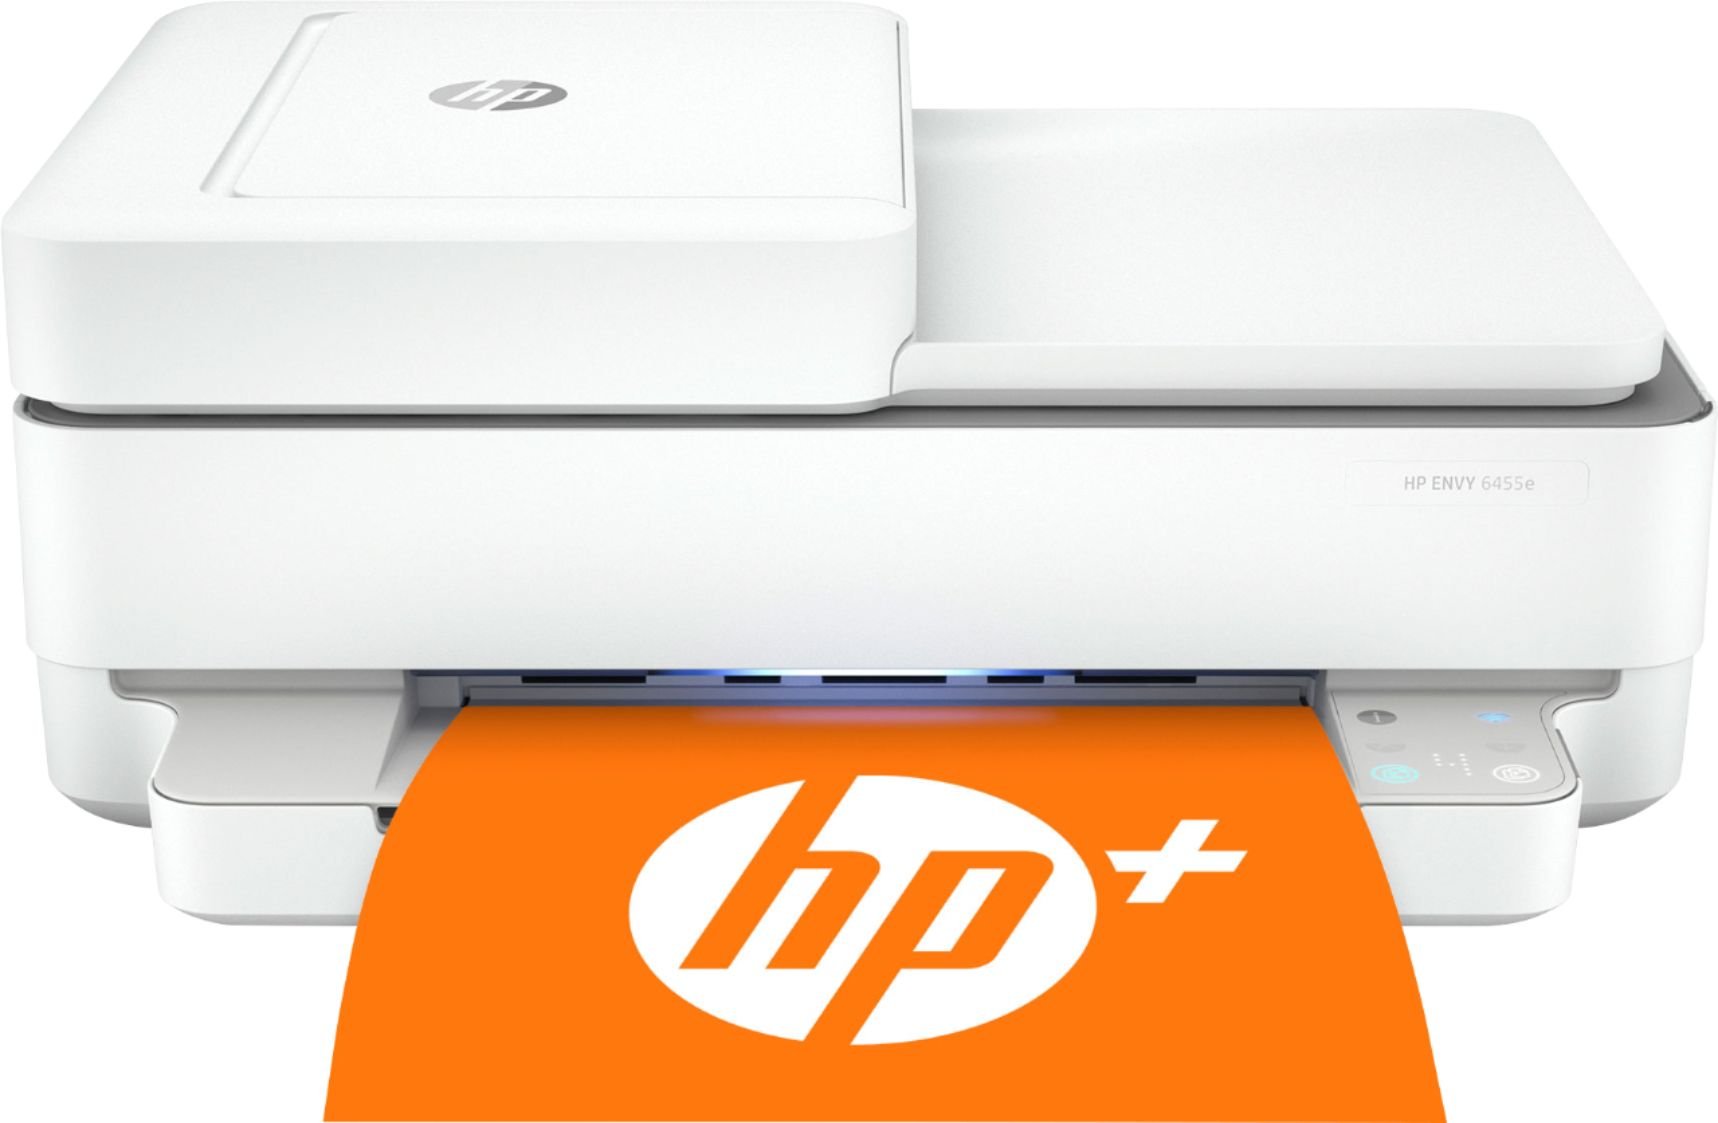 Hp Envy 6455e All In One Printer With 6 Months Free Ink Through Hp Plus Rc Willey 0907